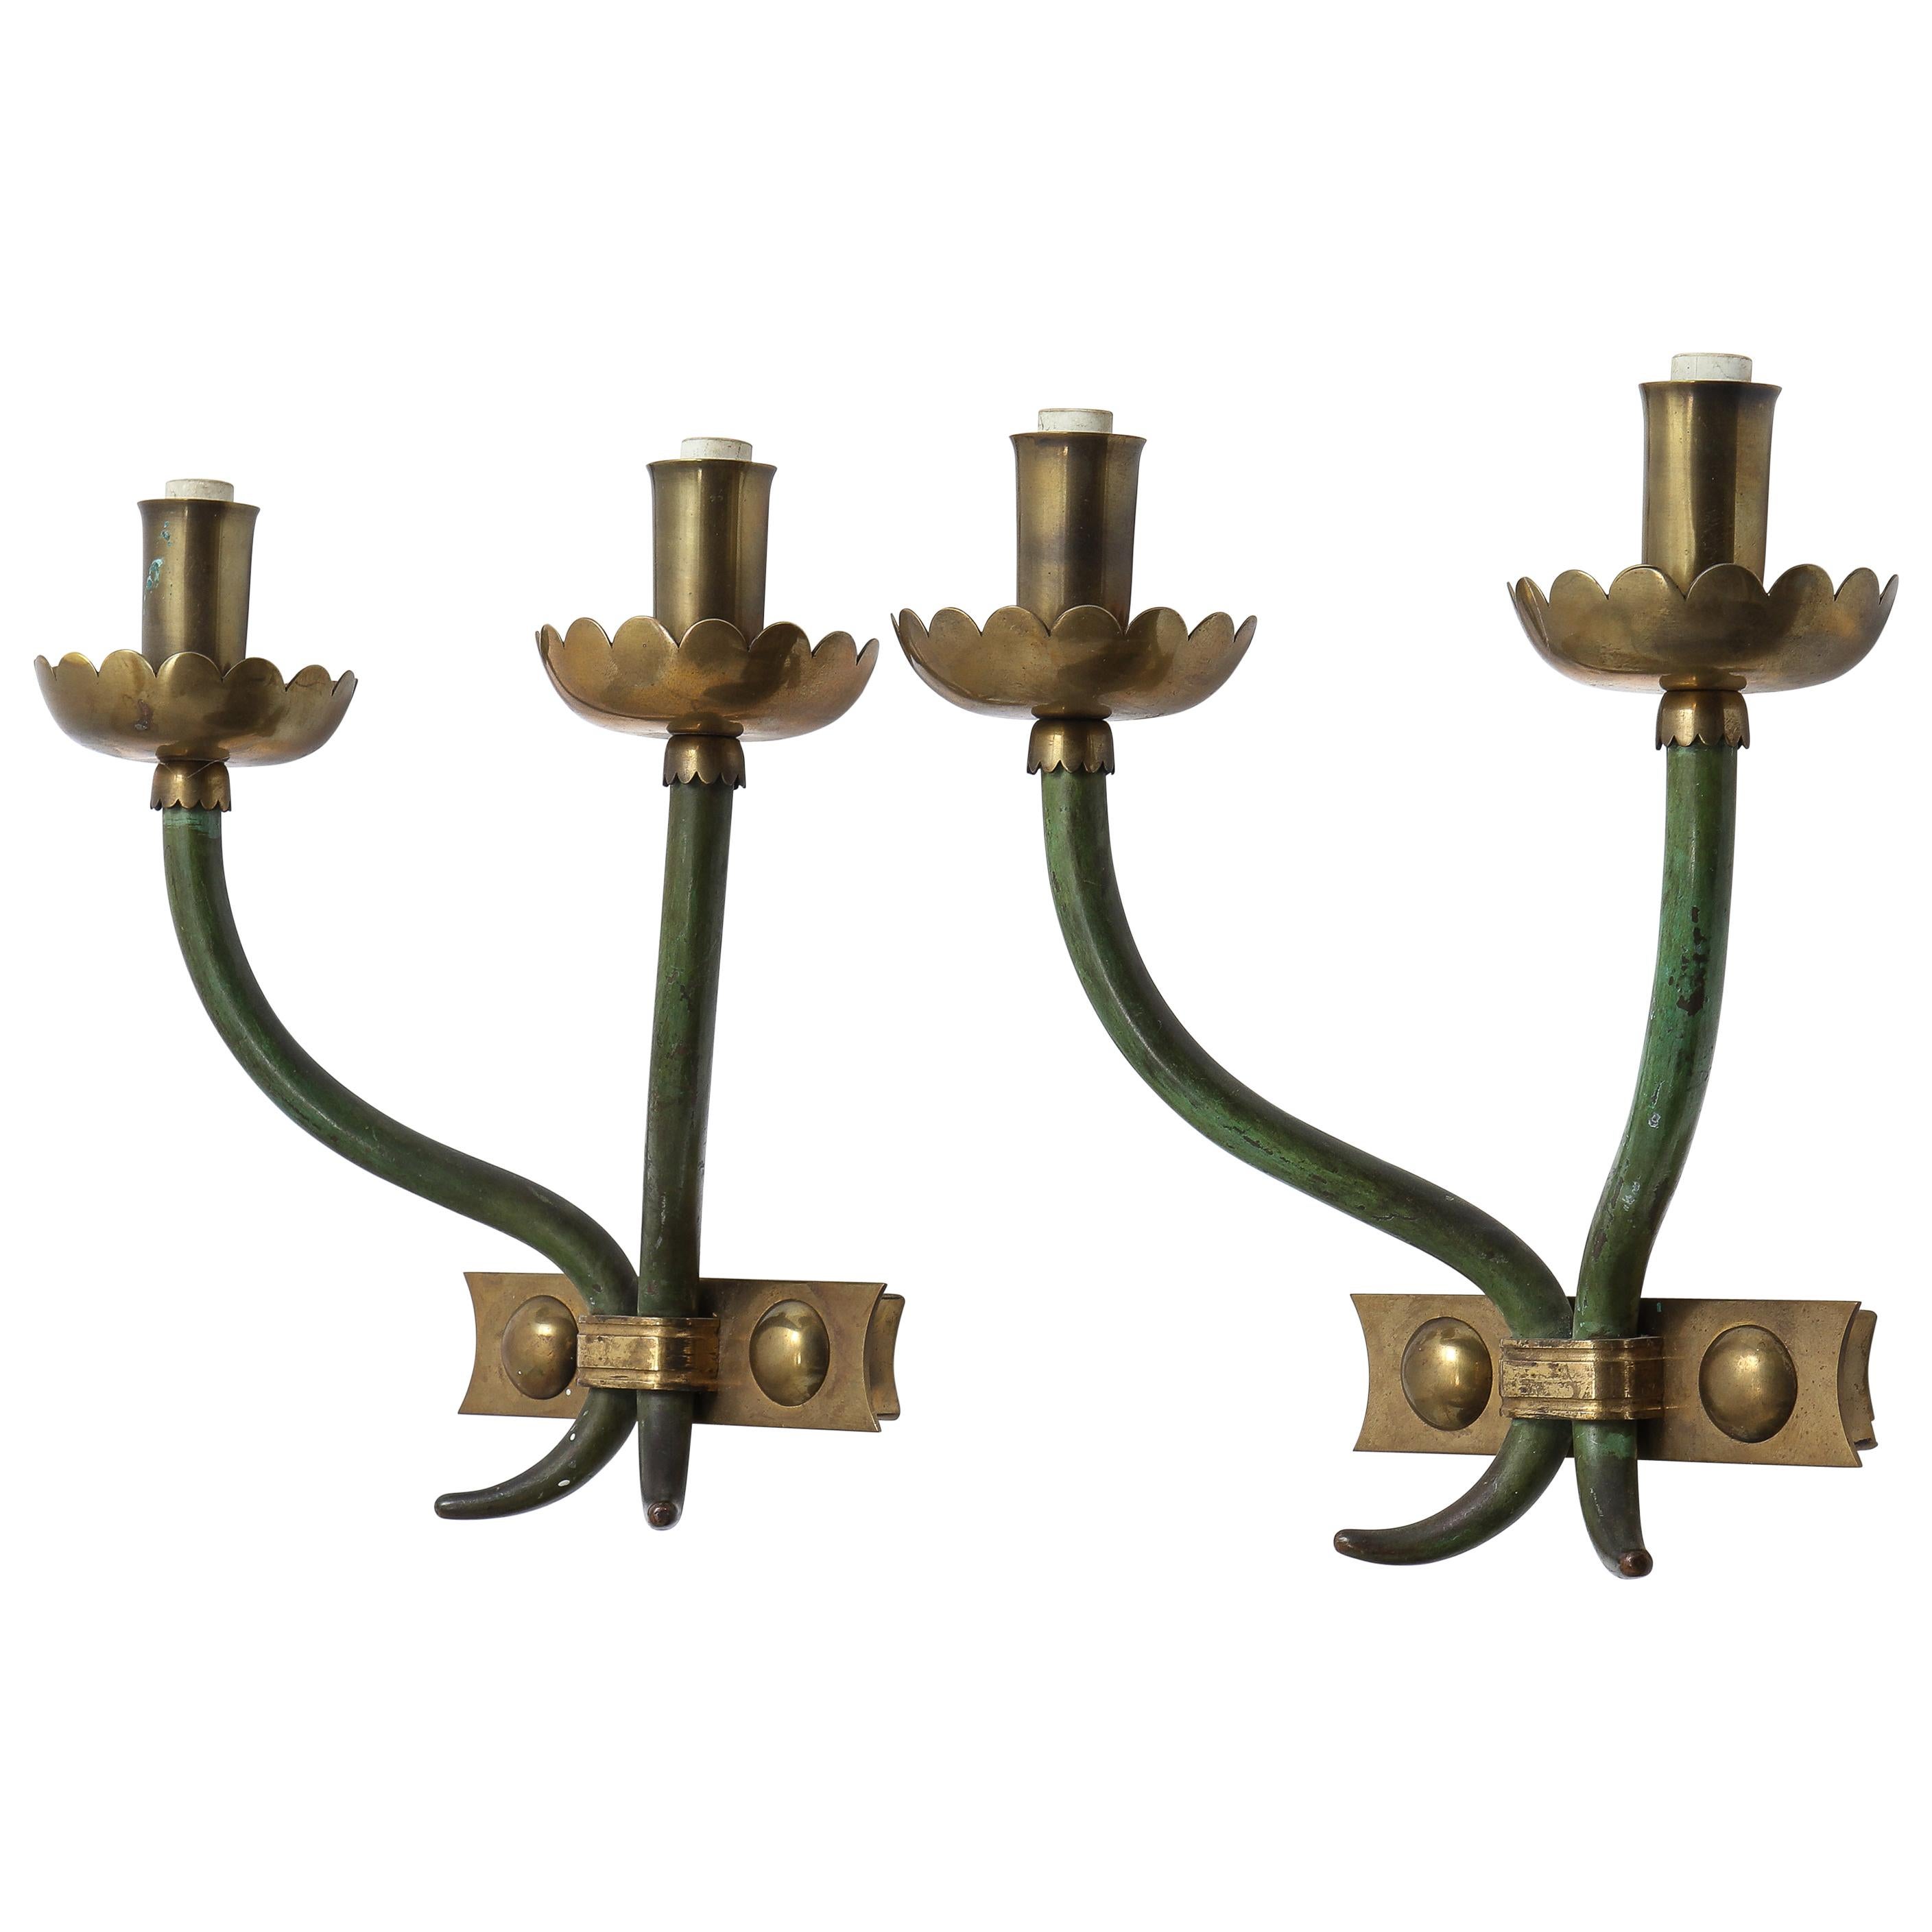 Pair of Bronze Sconces in Two Patinas, Style of Gio Ponti, Italy, 1960s